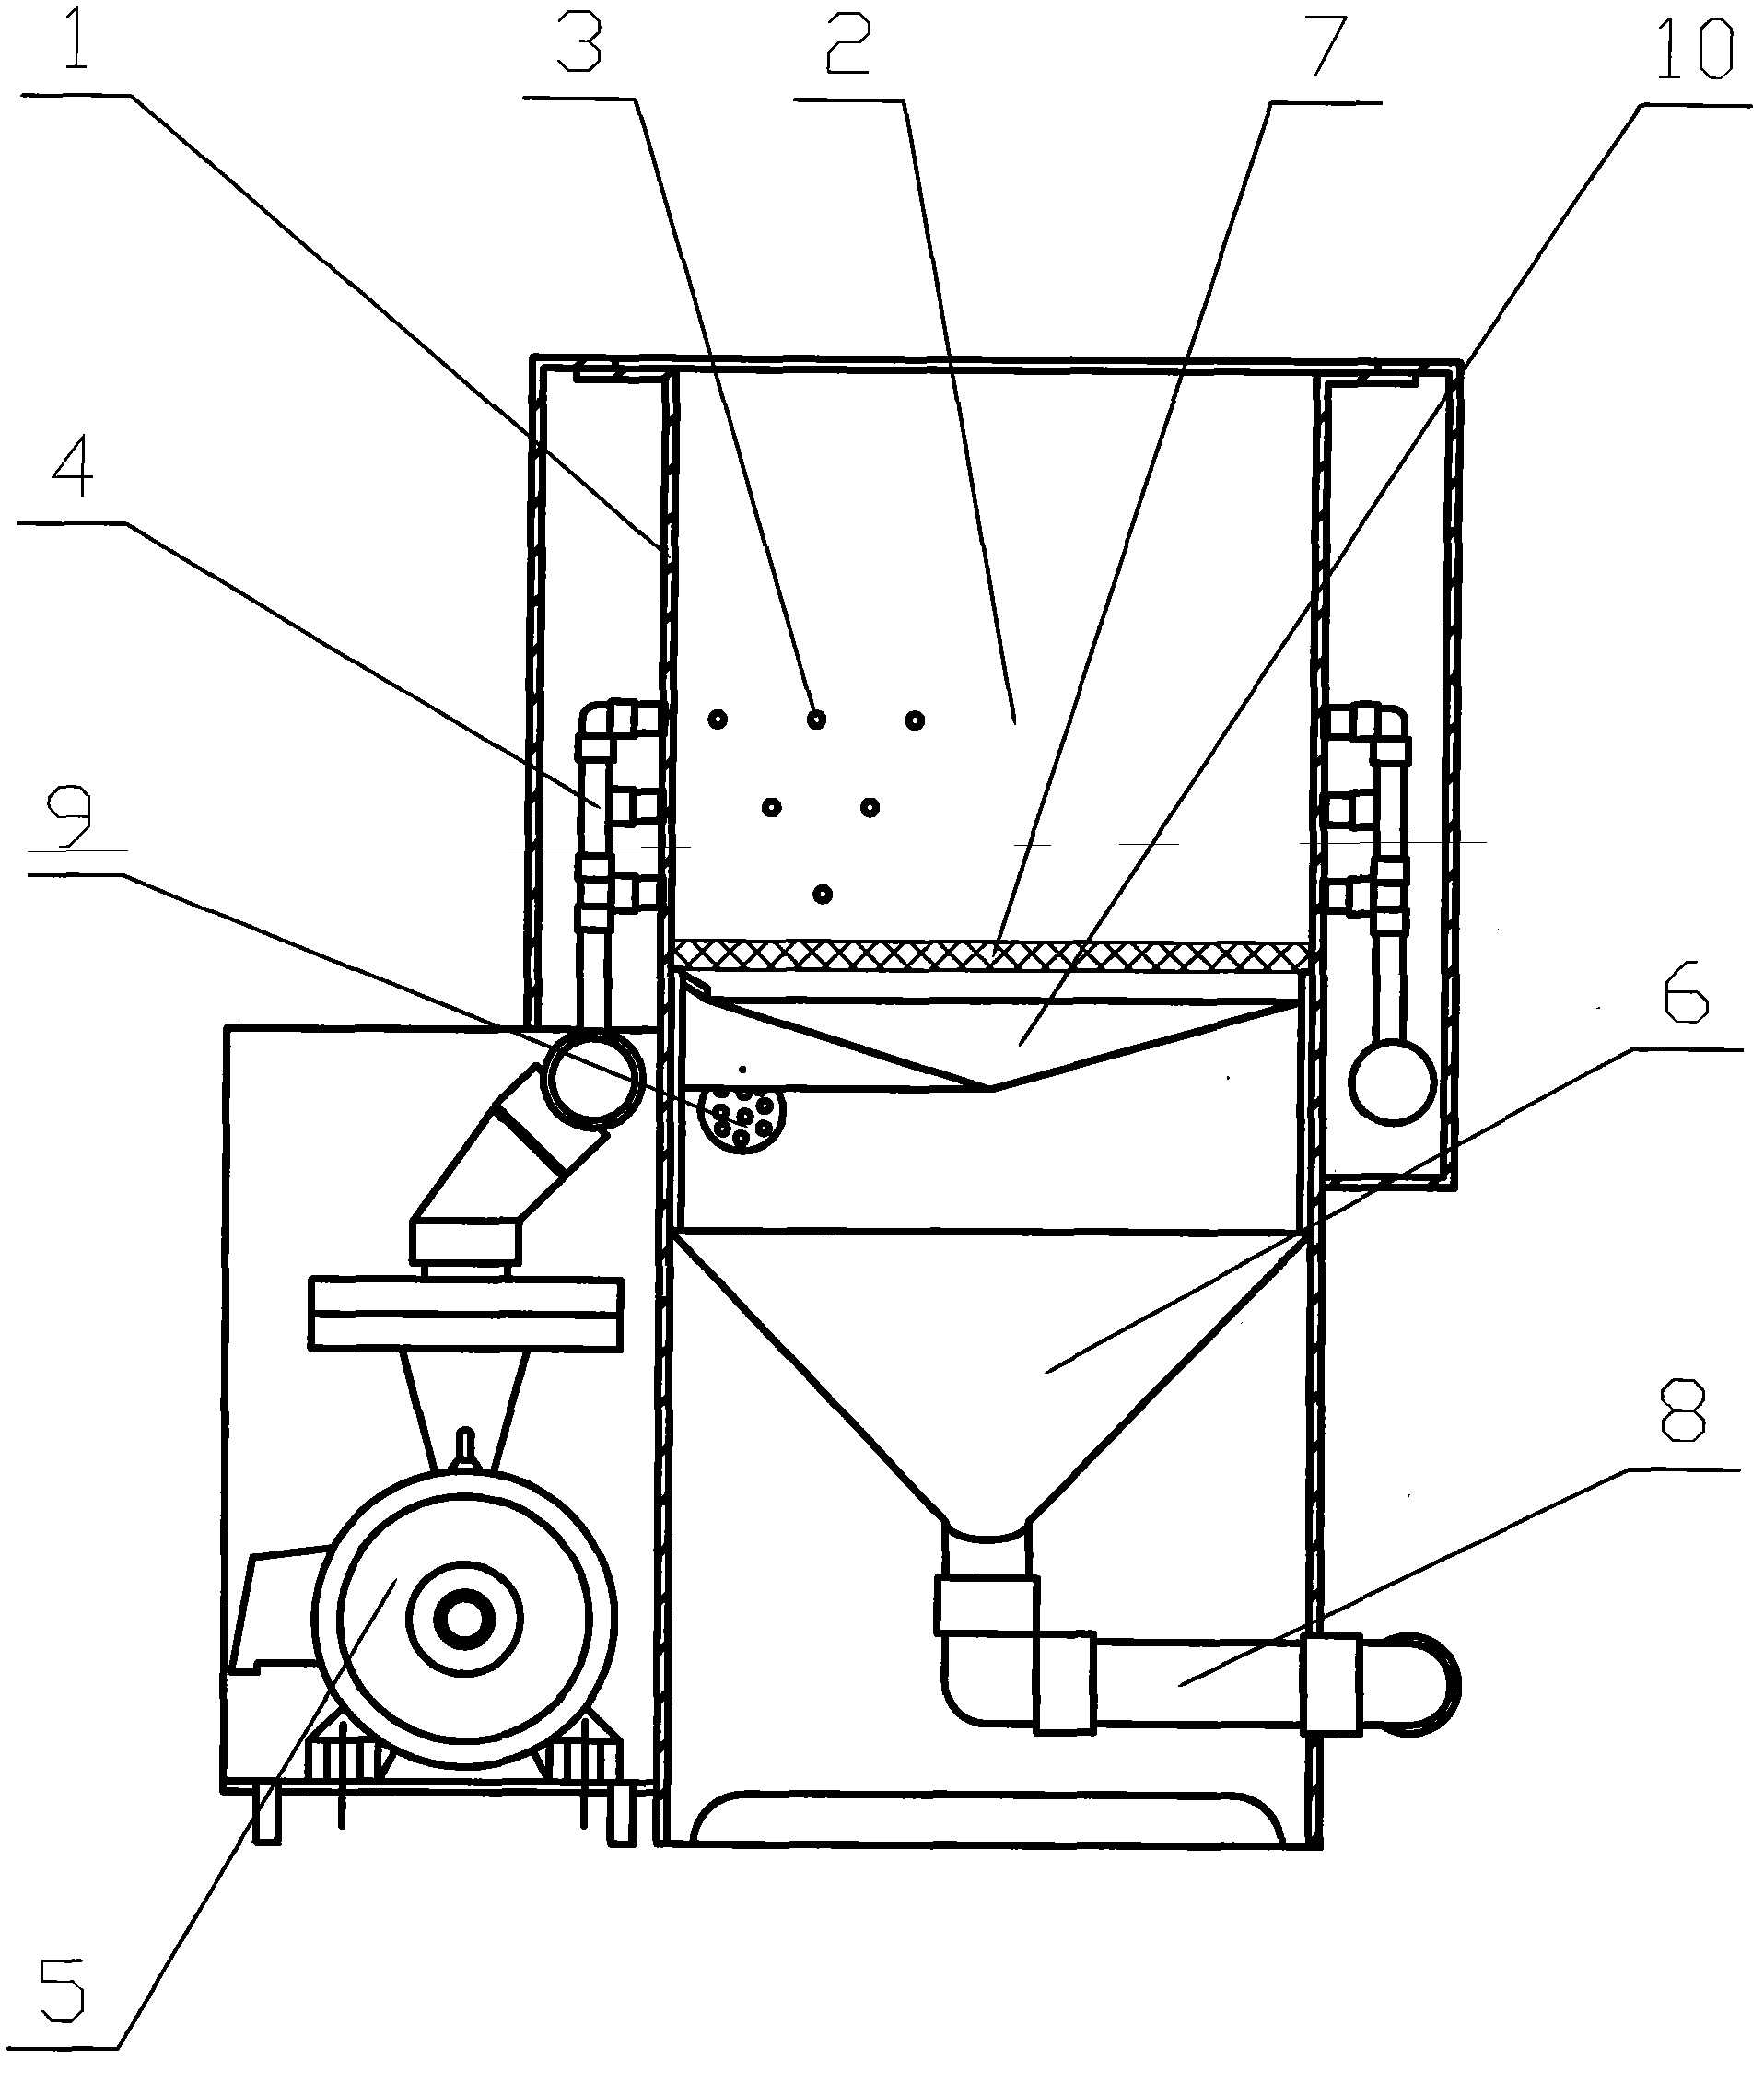 Scallop cleaning machine